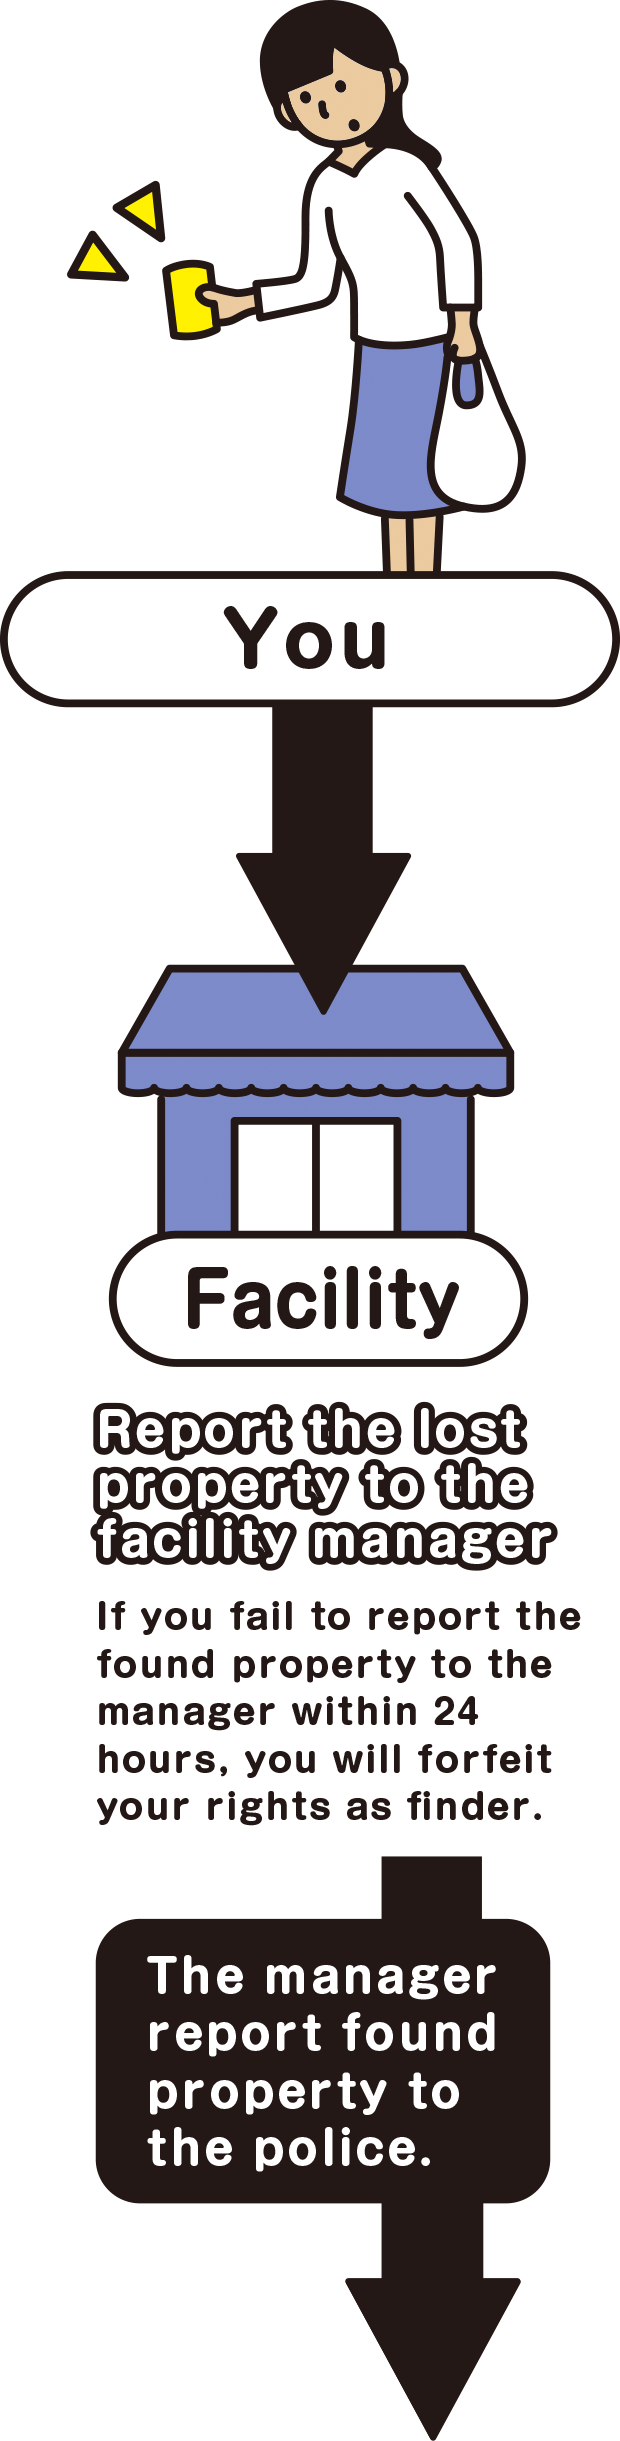 If you fail to report the found property to the manager within 24 hours, you will forfeit your rights as finder.　The manager report the found property to the police